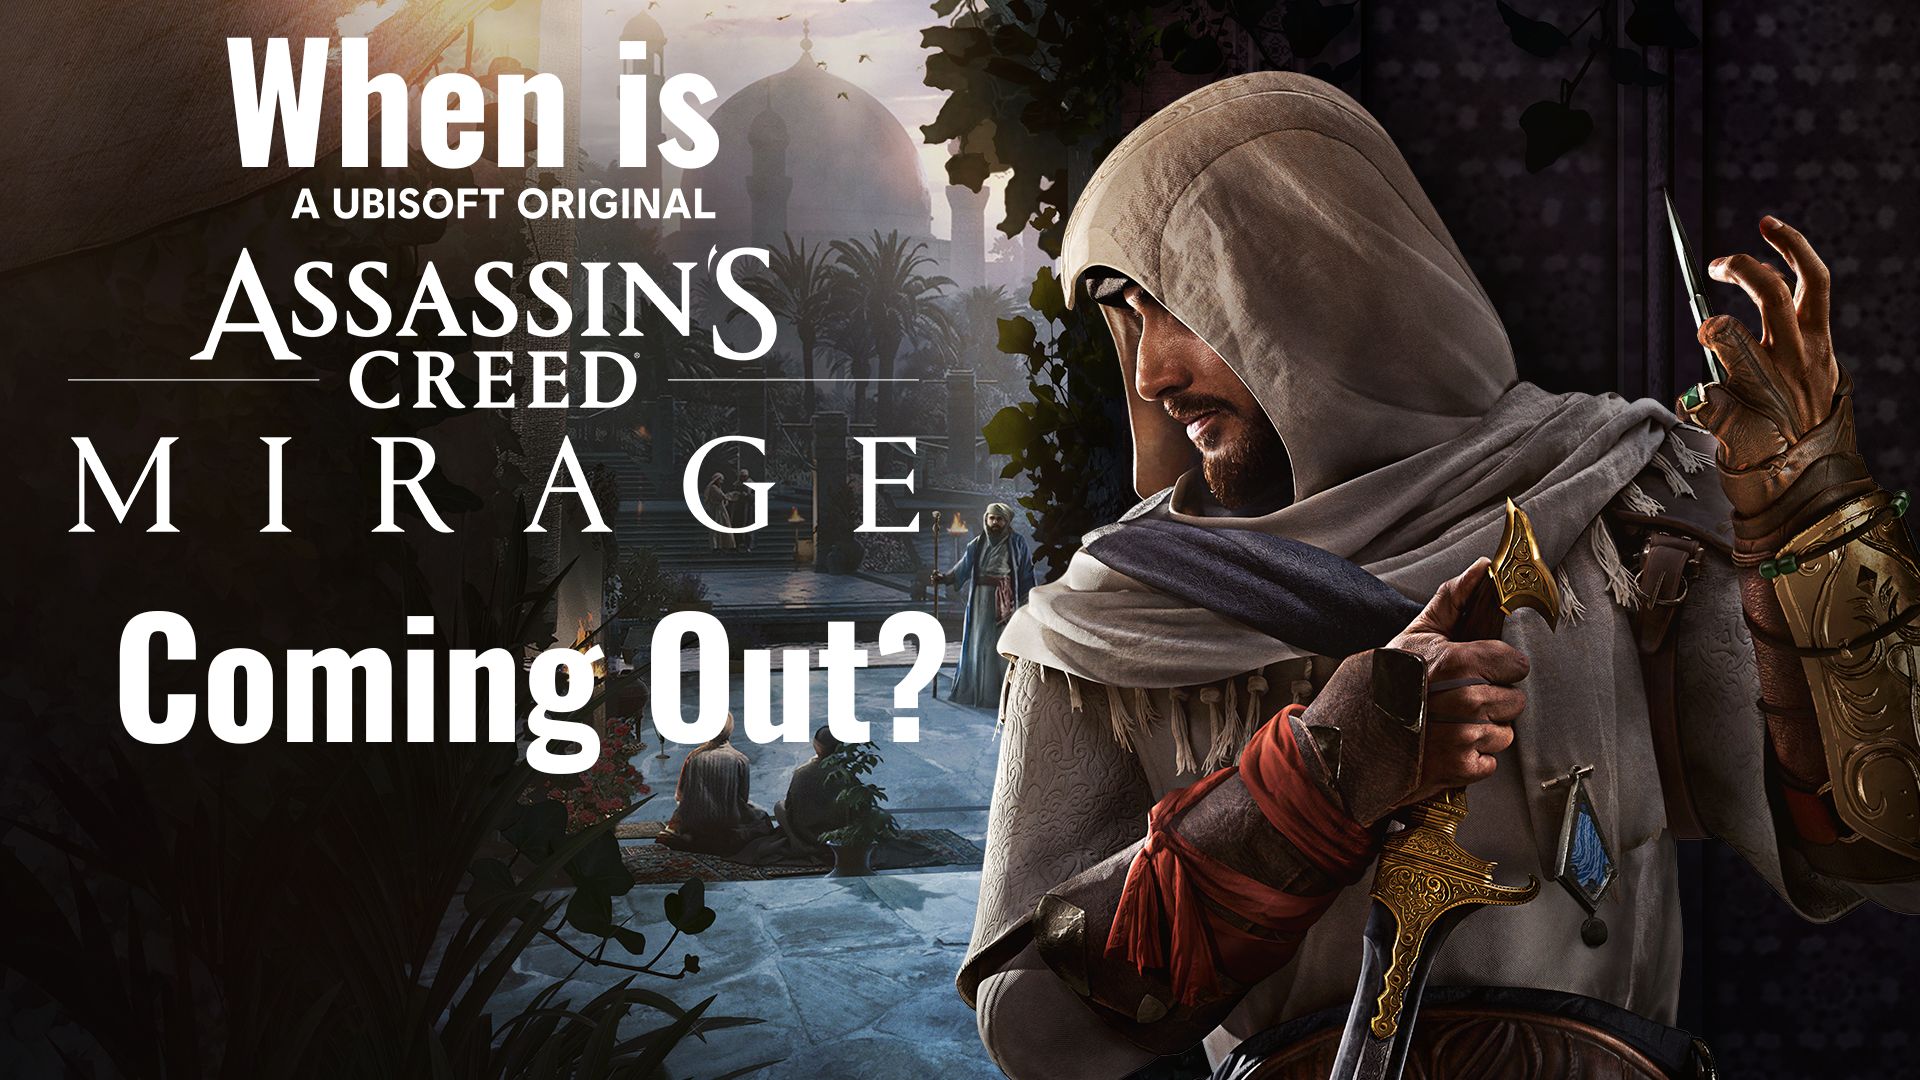 When is Assassin's Creed Mirage coming out?